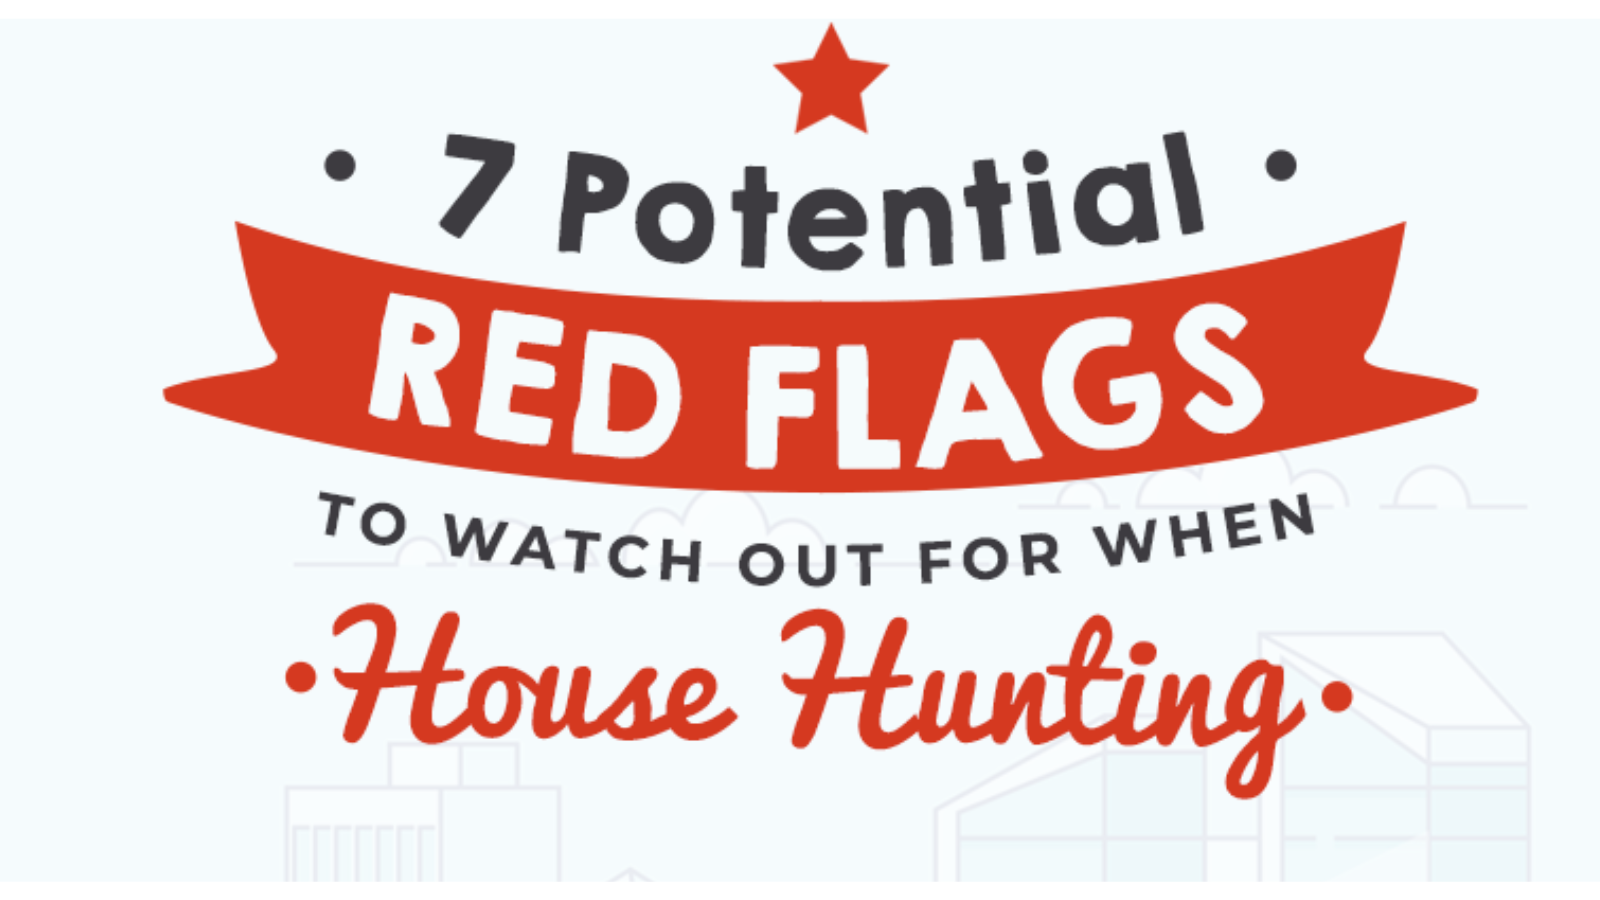 7 Potential Red Flags To Watch Out For When House Hunting